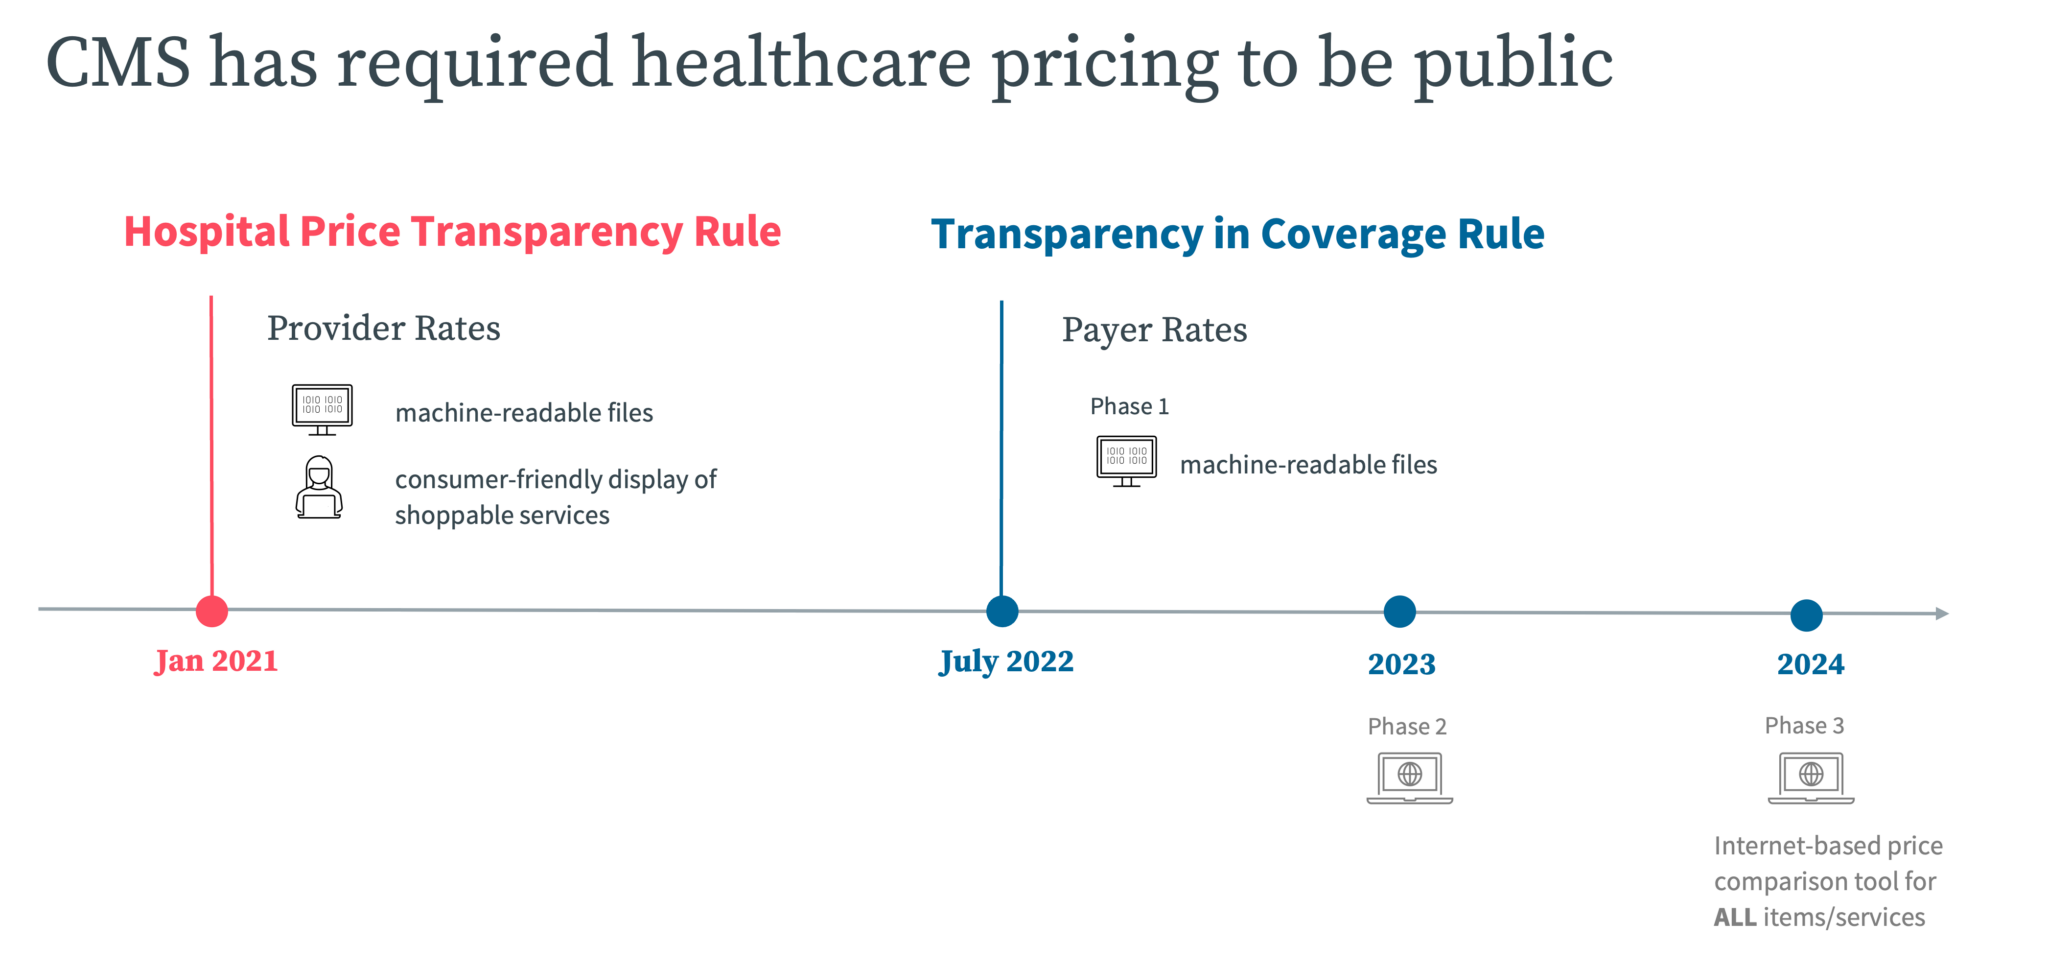 What to expect in the new era of healthcare price transparency